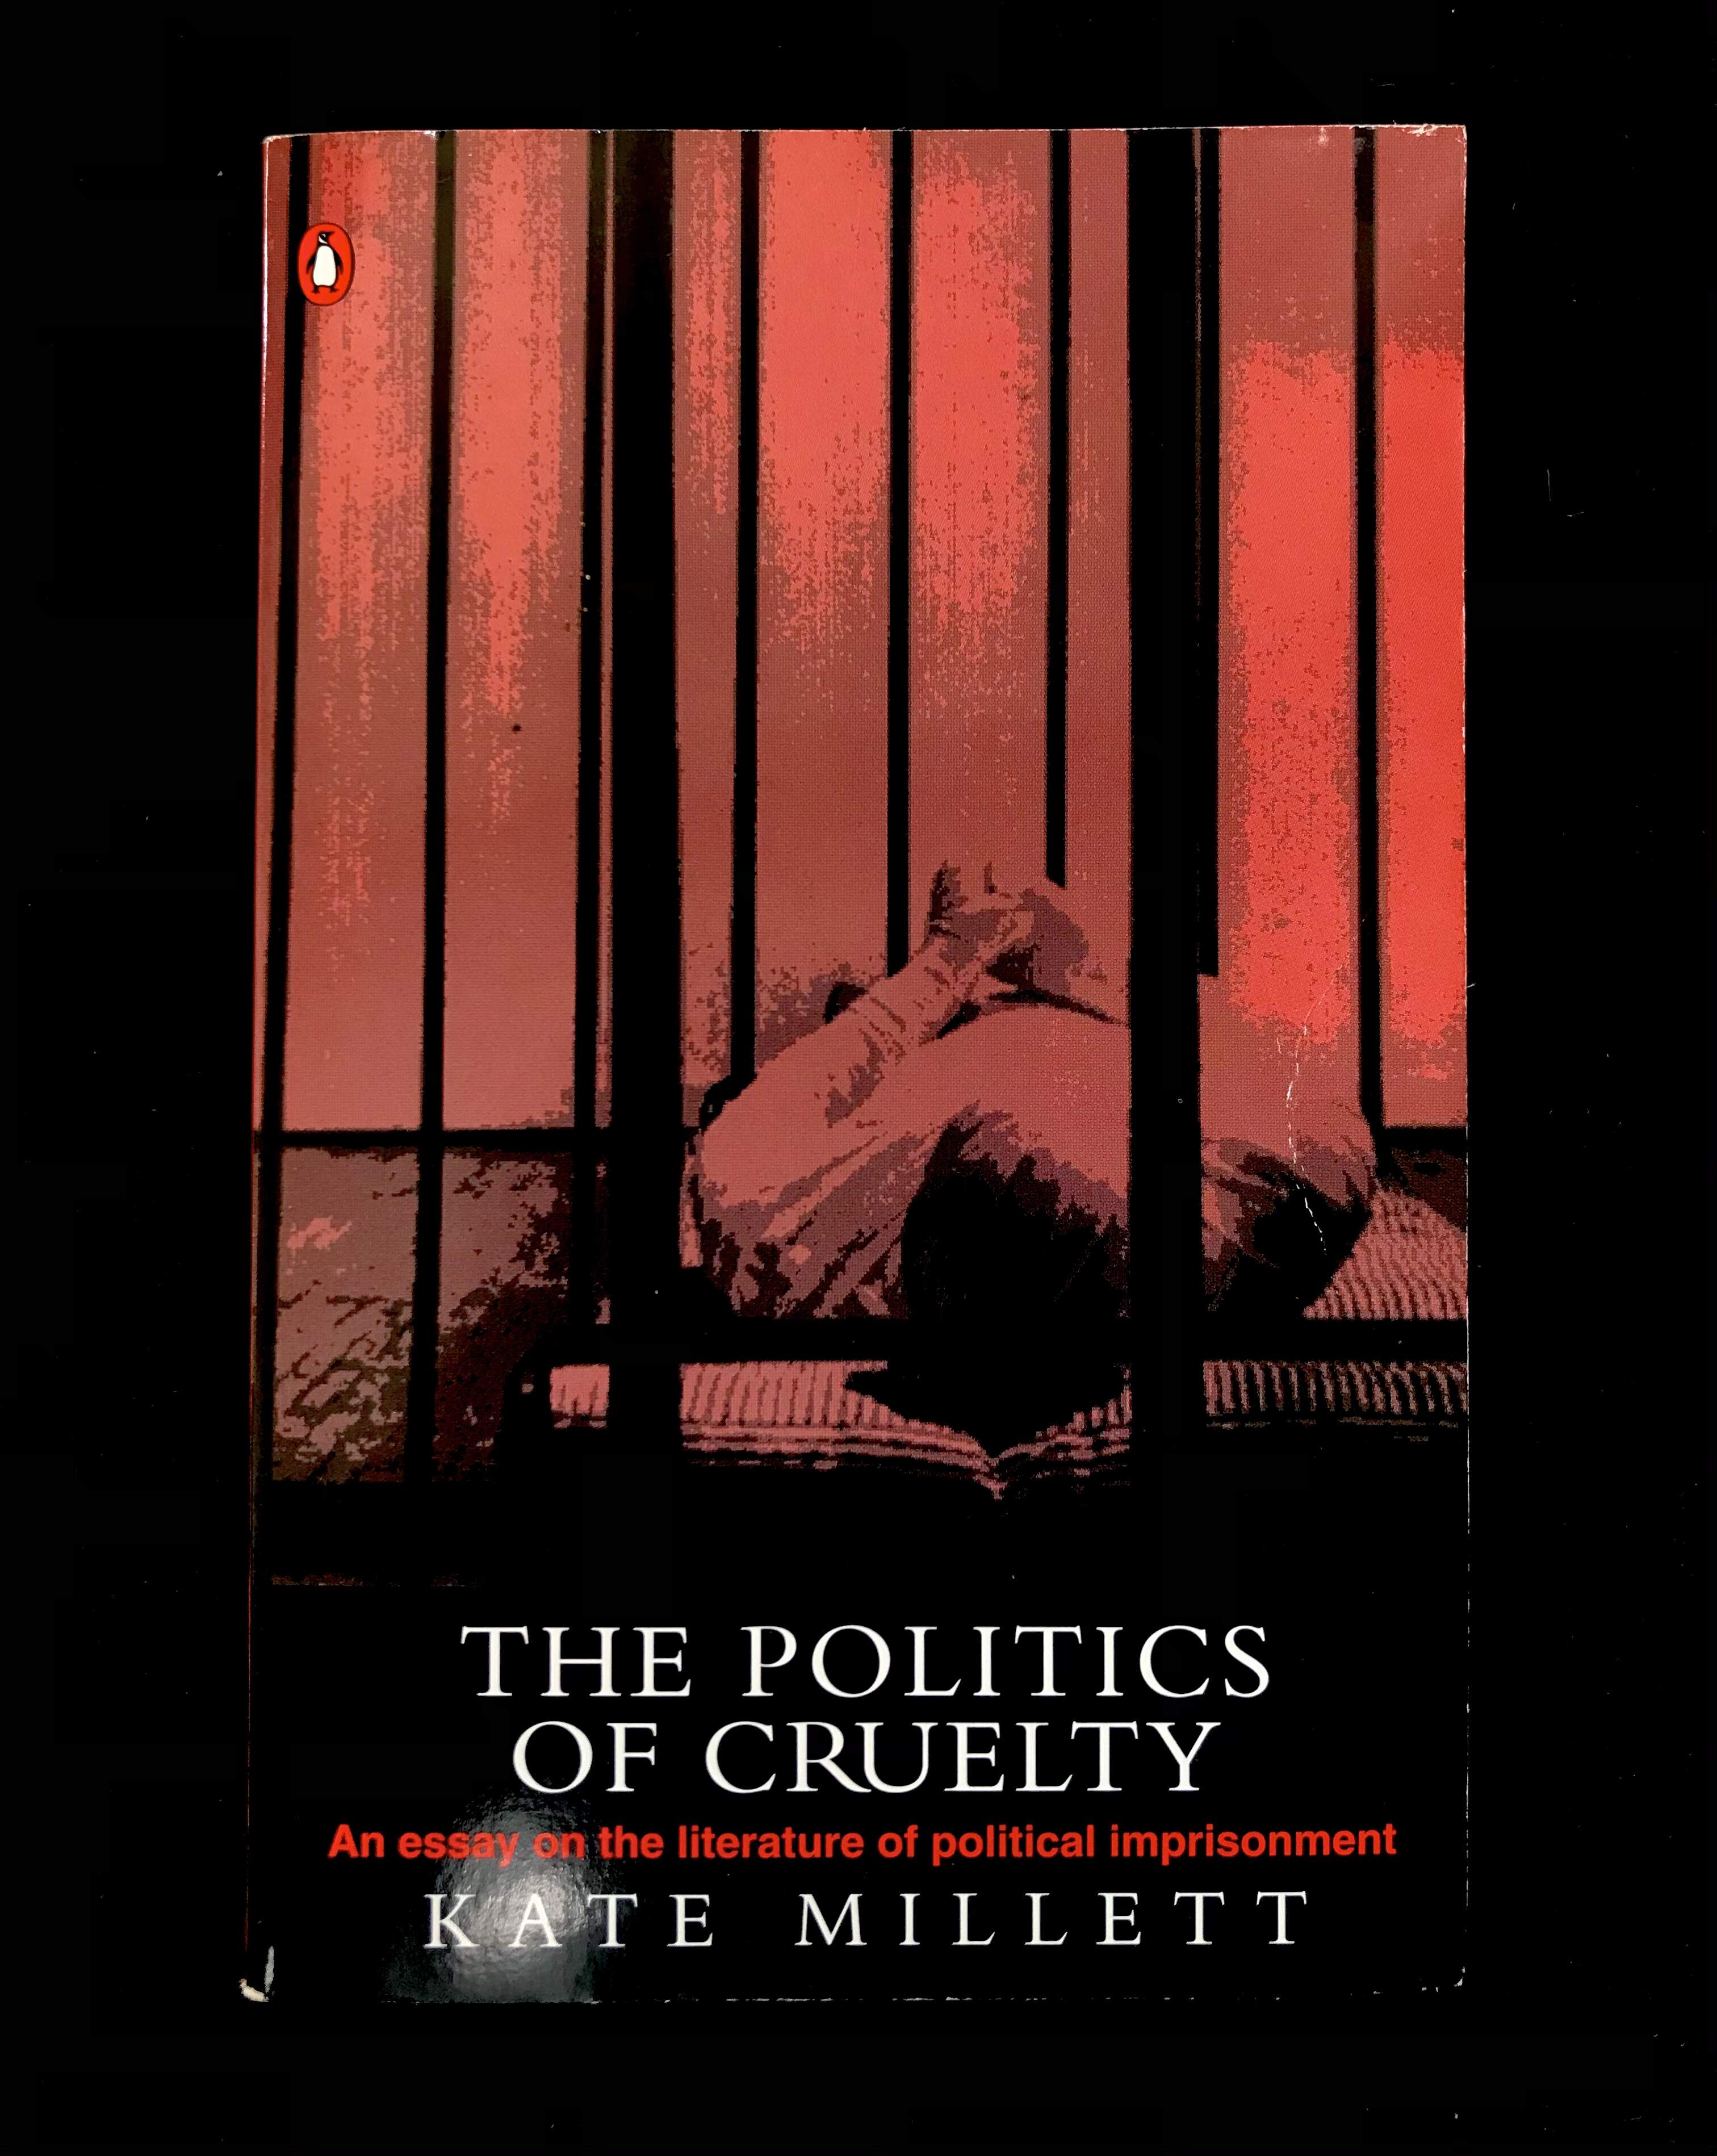 The Politics of Cruelty: An Essay On The Literature of Political Imprisonment by Kate Millet